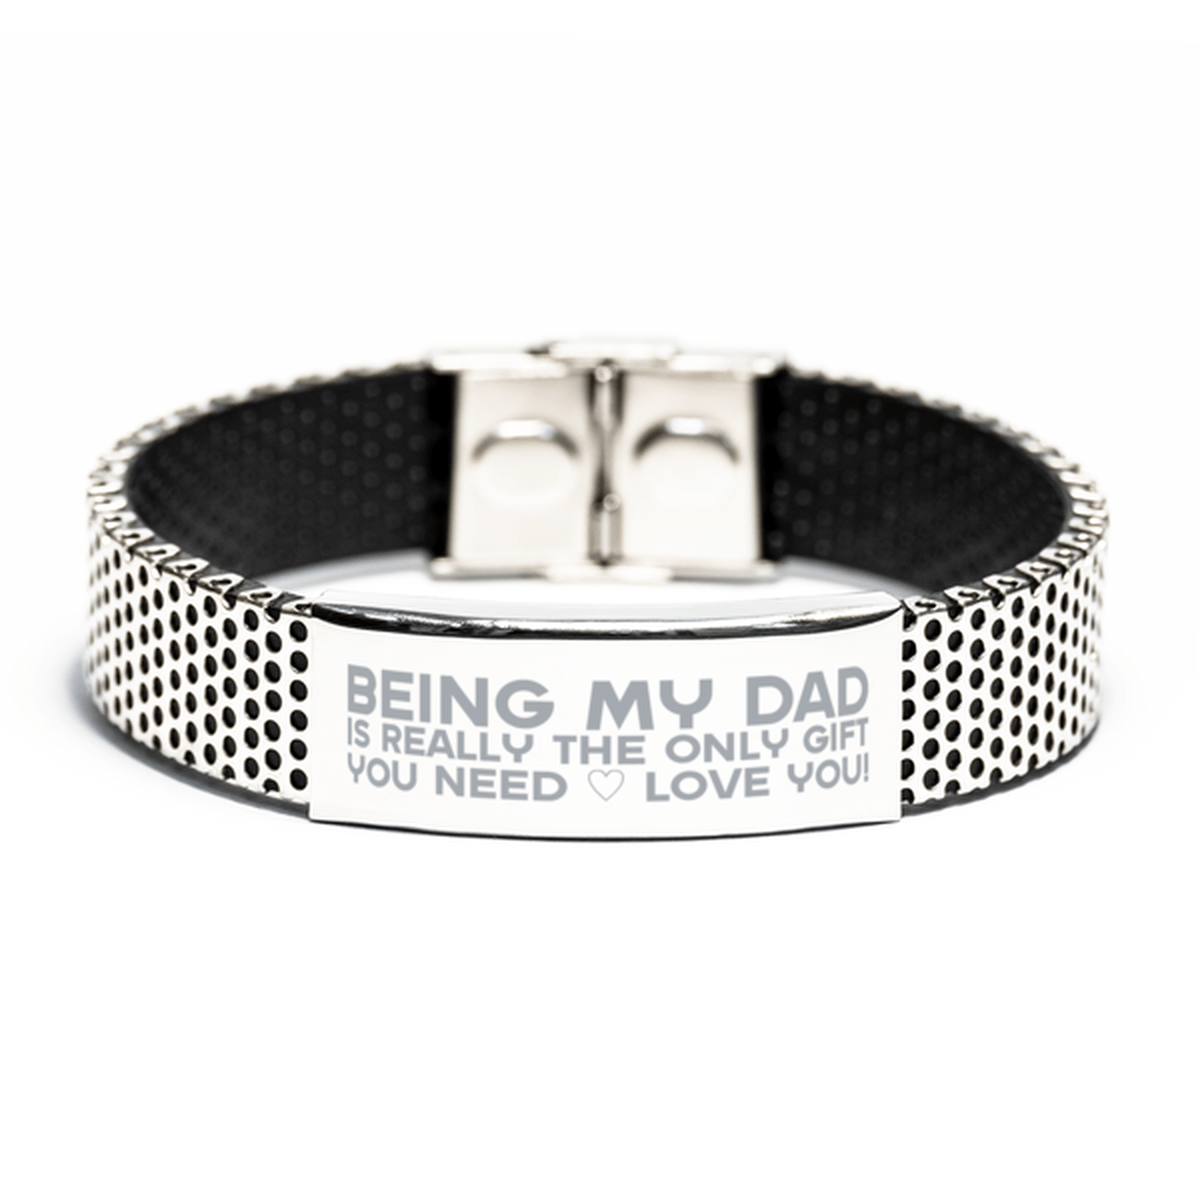 Funny Dad Stainless Steel Bracelet, Being My Dad Is Really the Only Gift You Need, Best Birthday Gifts for Dad